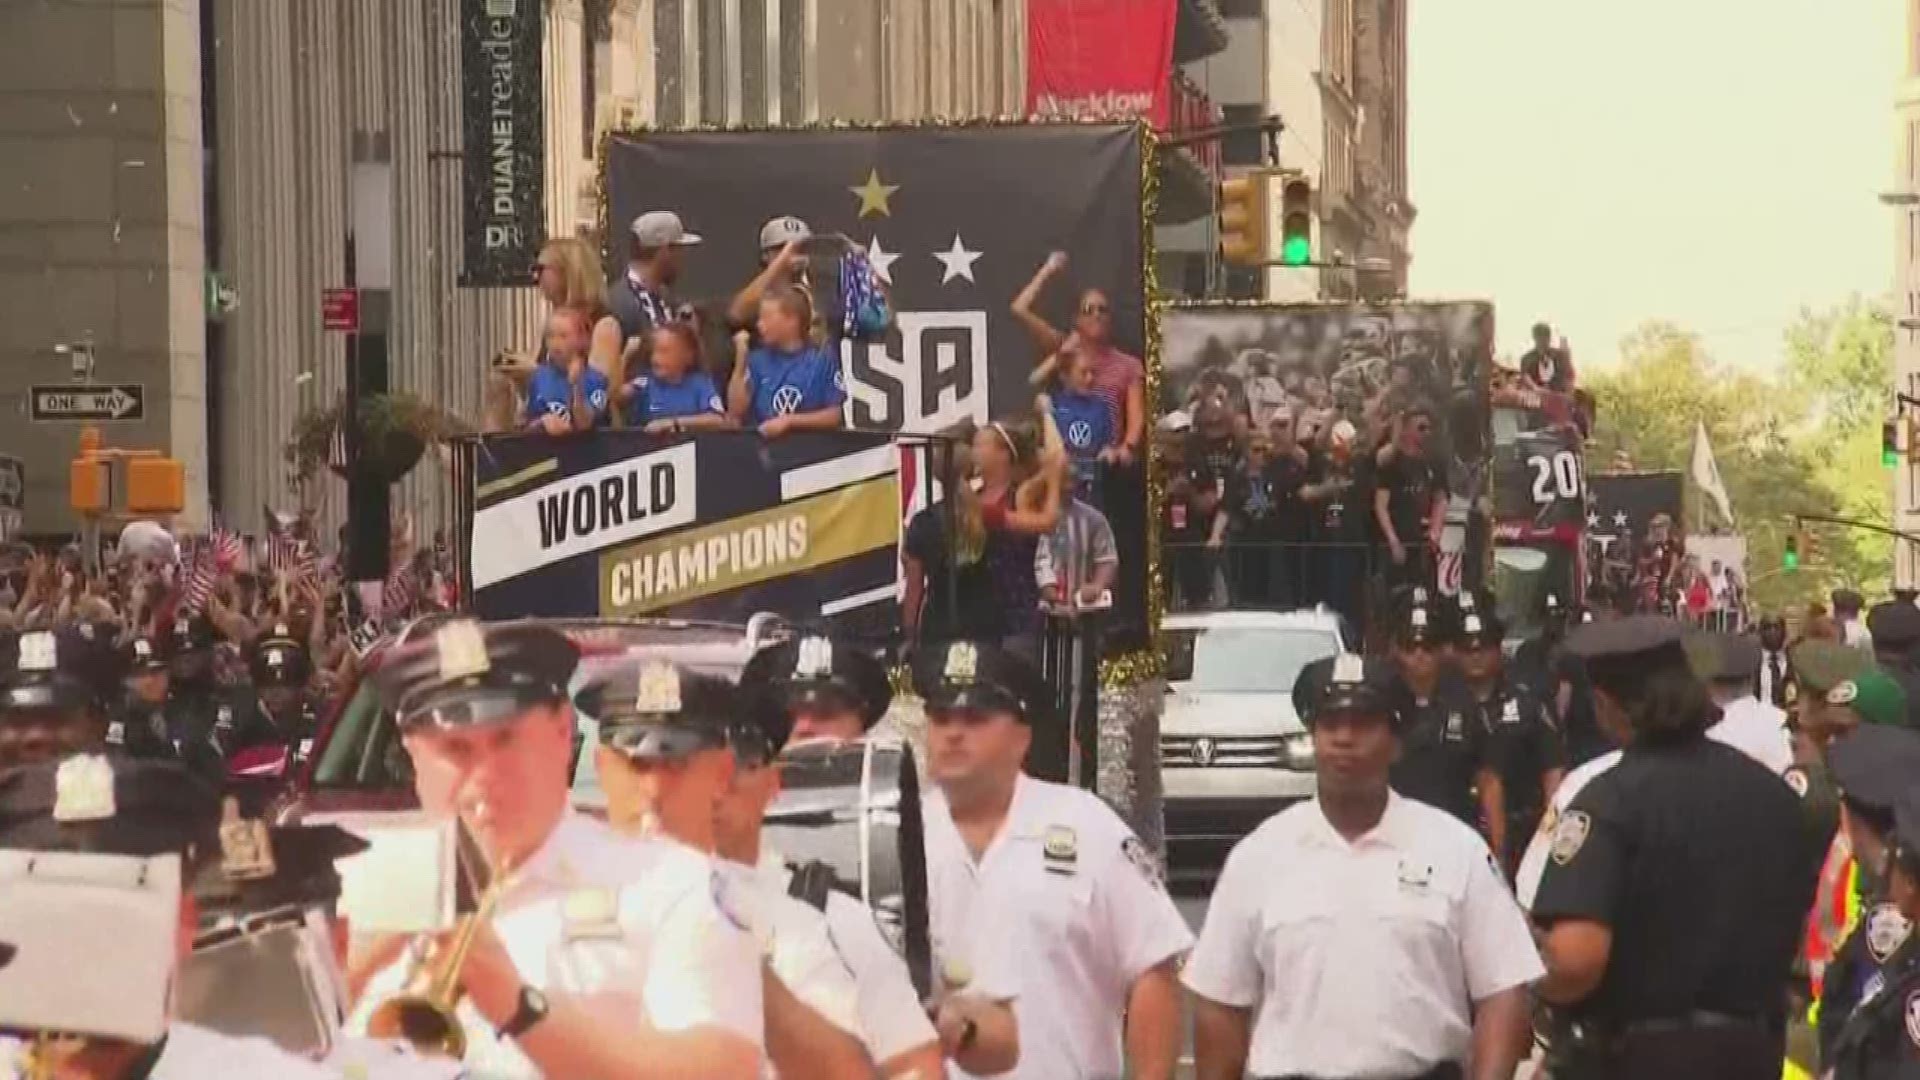 This is the team's 2nd consecutive title. The team had a championship parade in New York City to commemorate the victory.